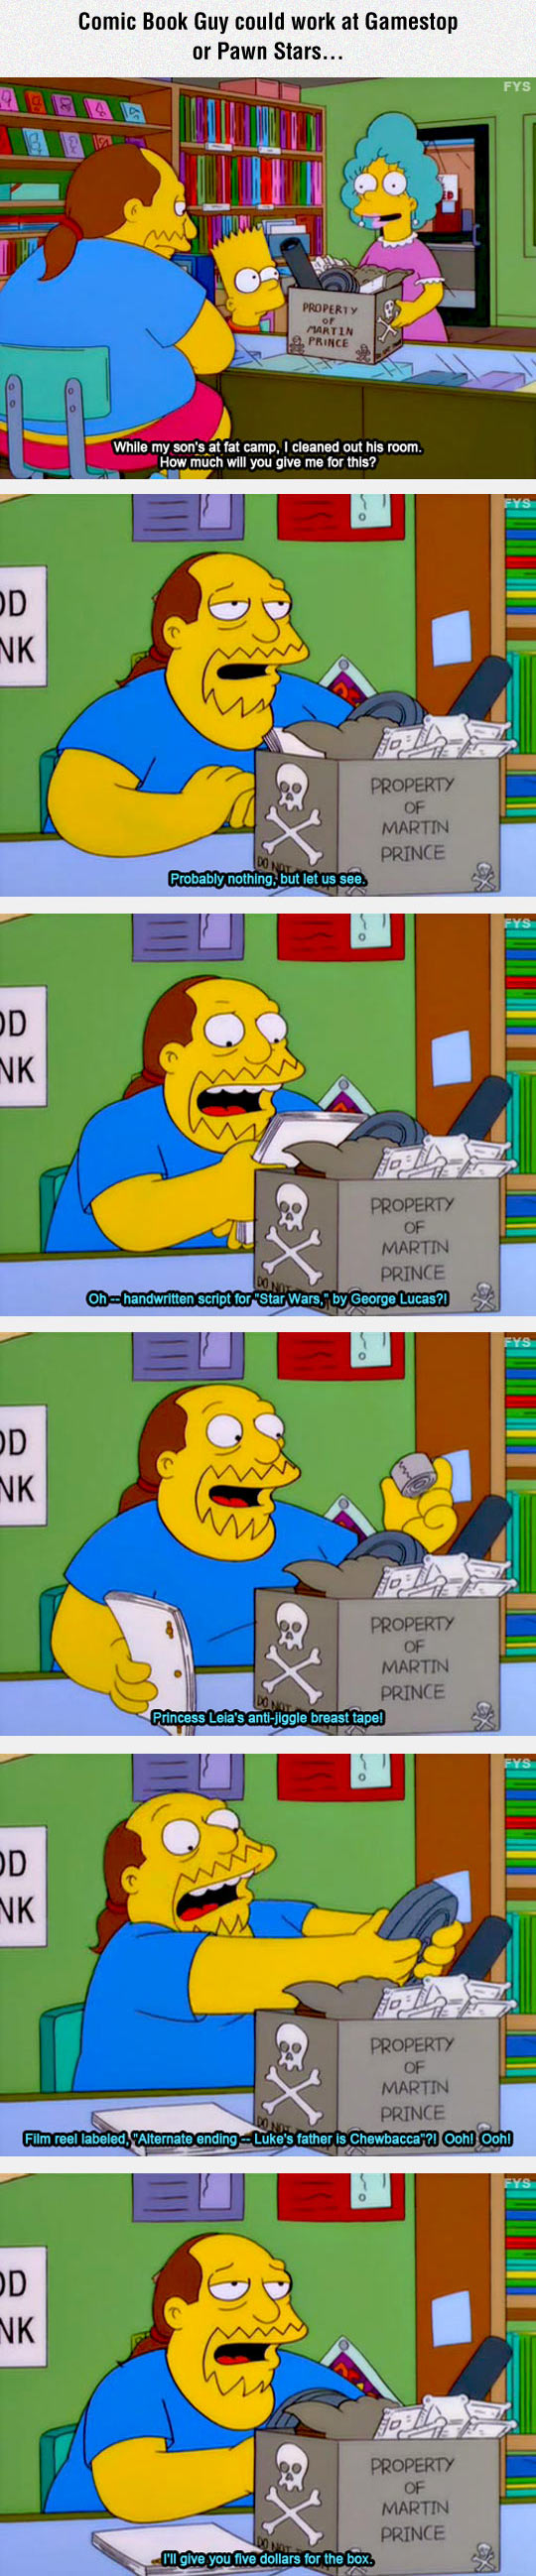 Comic Book Guy could work at Pawn Stars